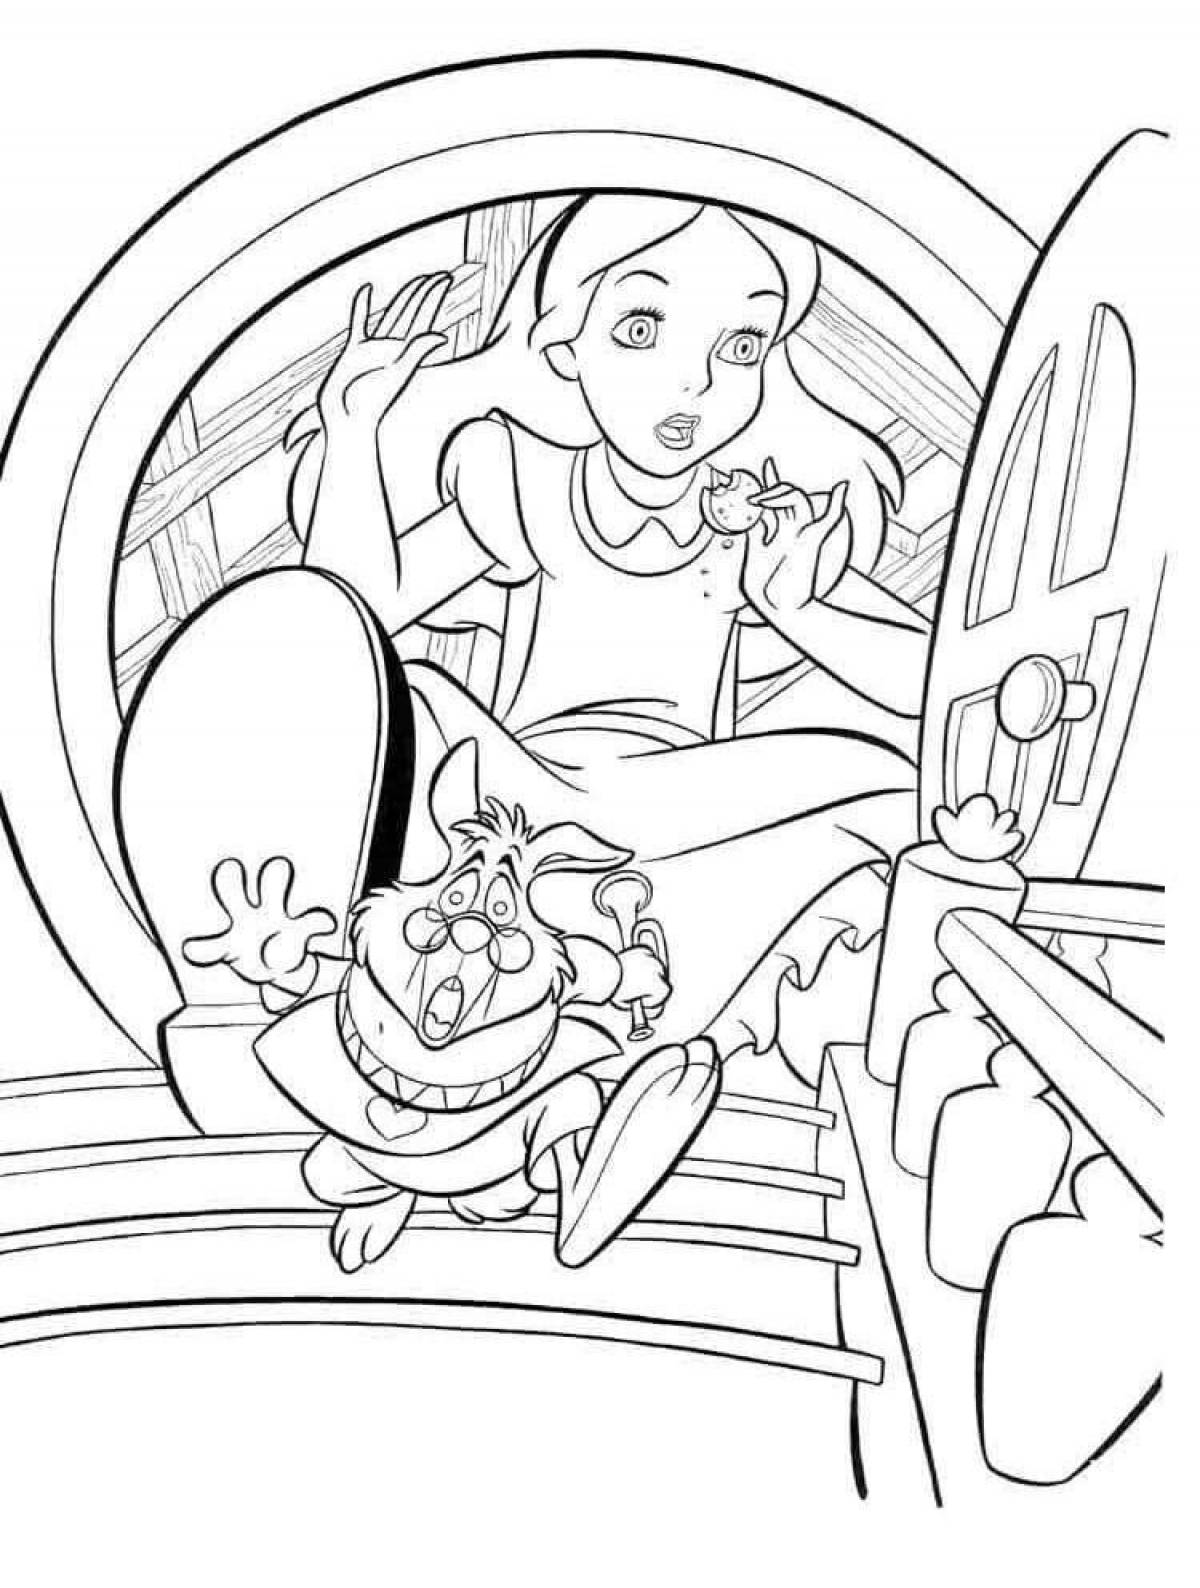 Alice Charming coloring page find